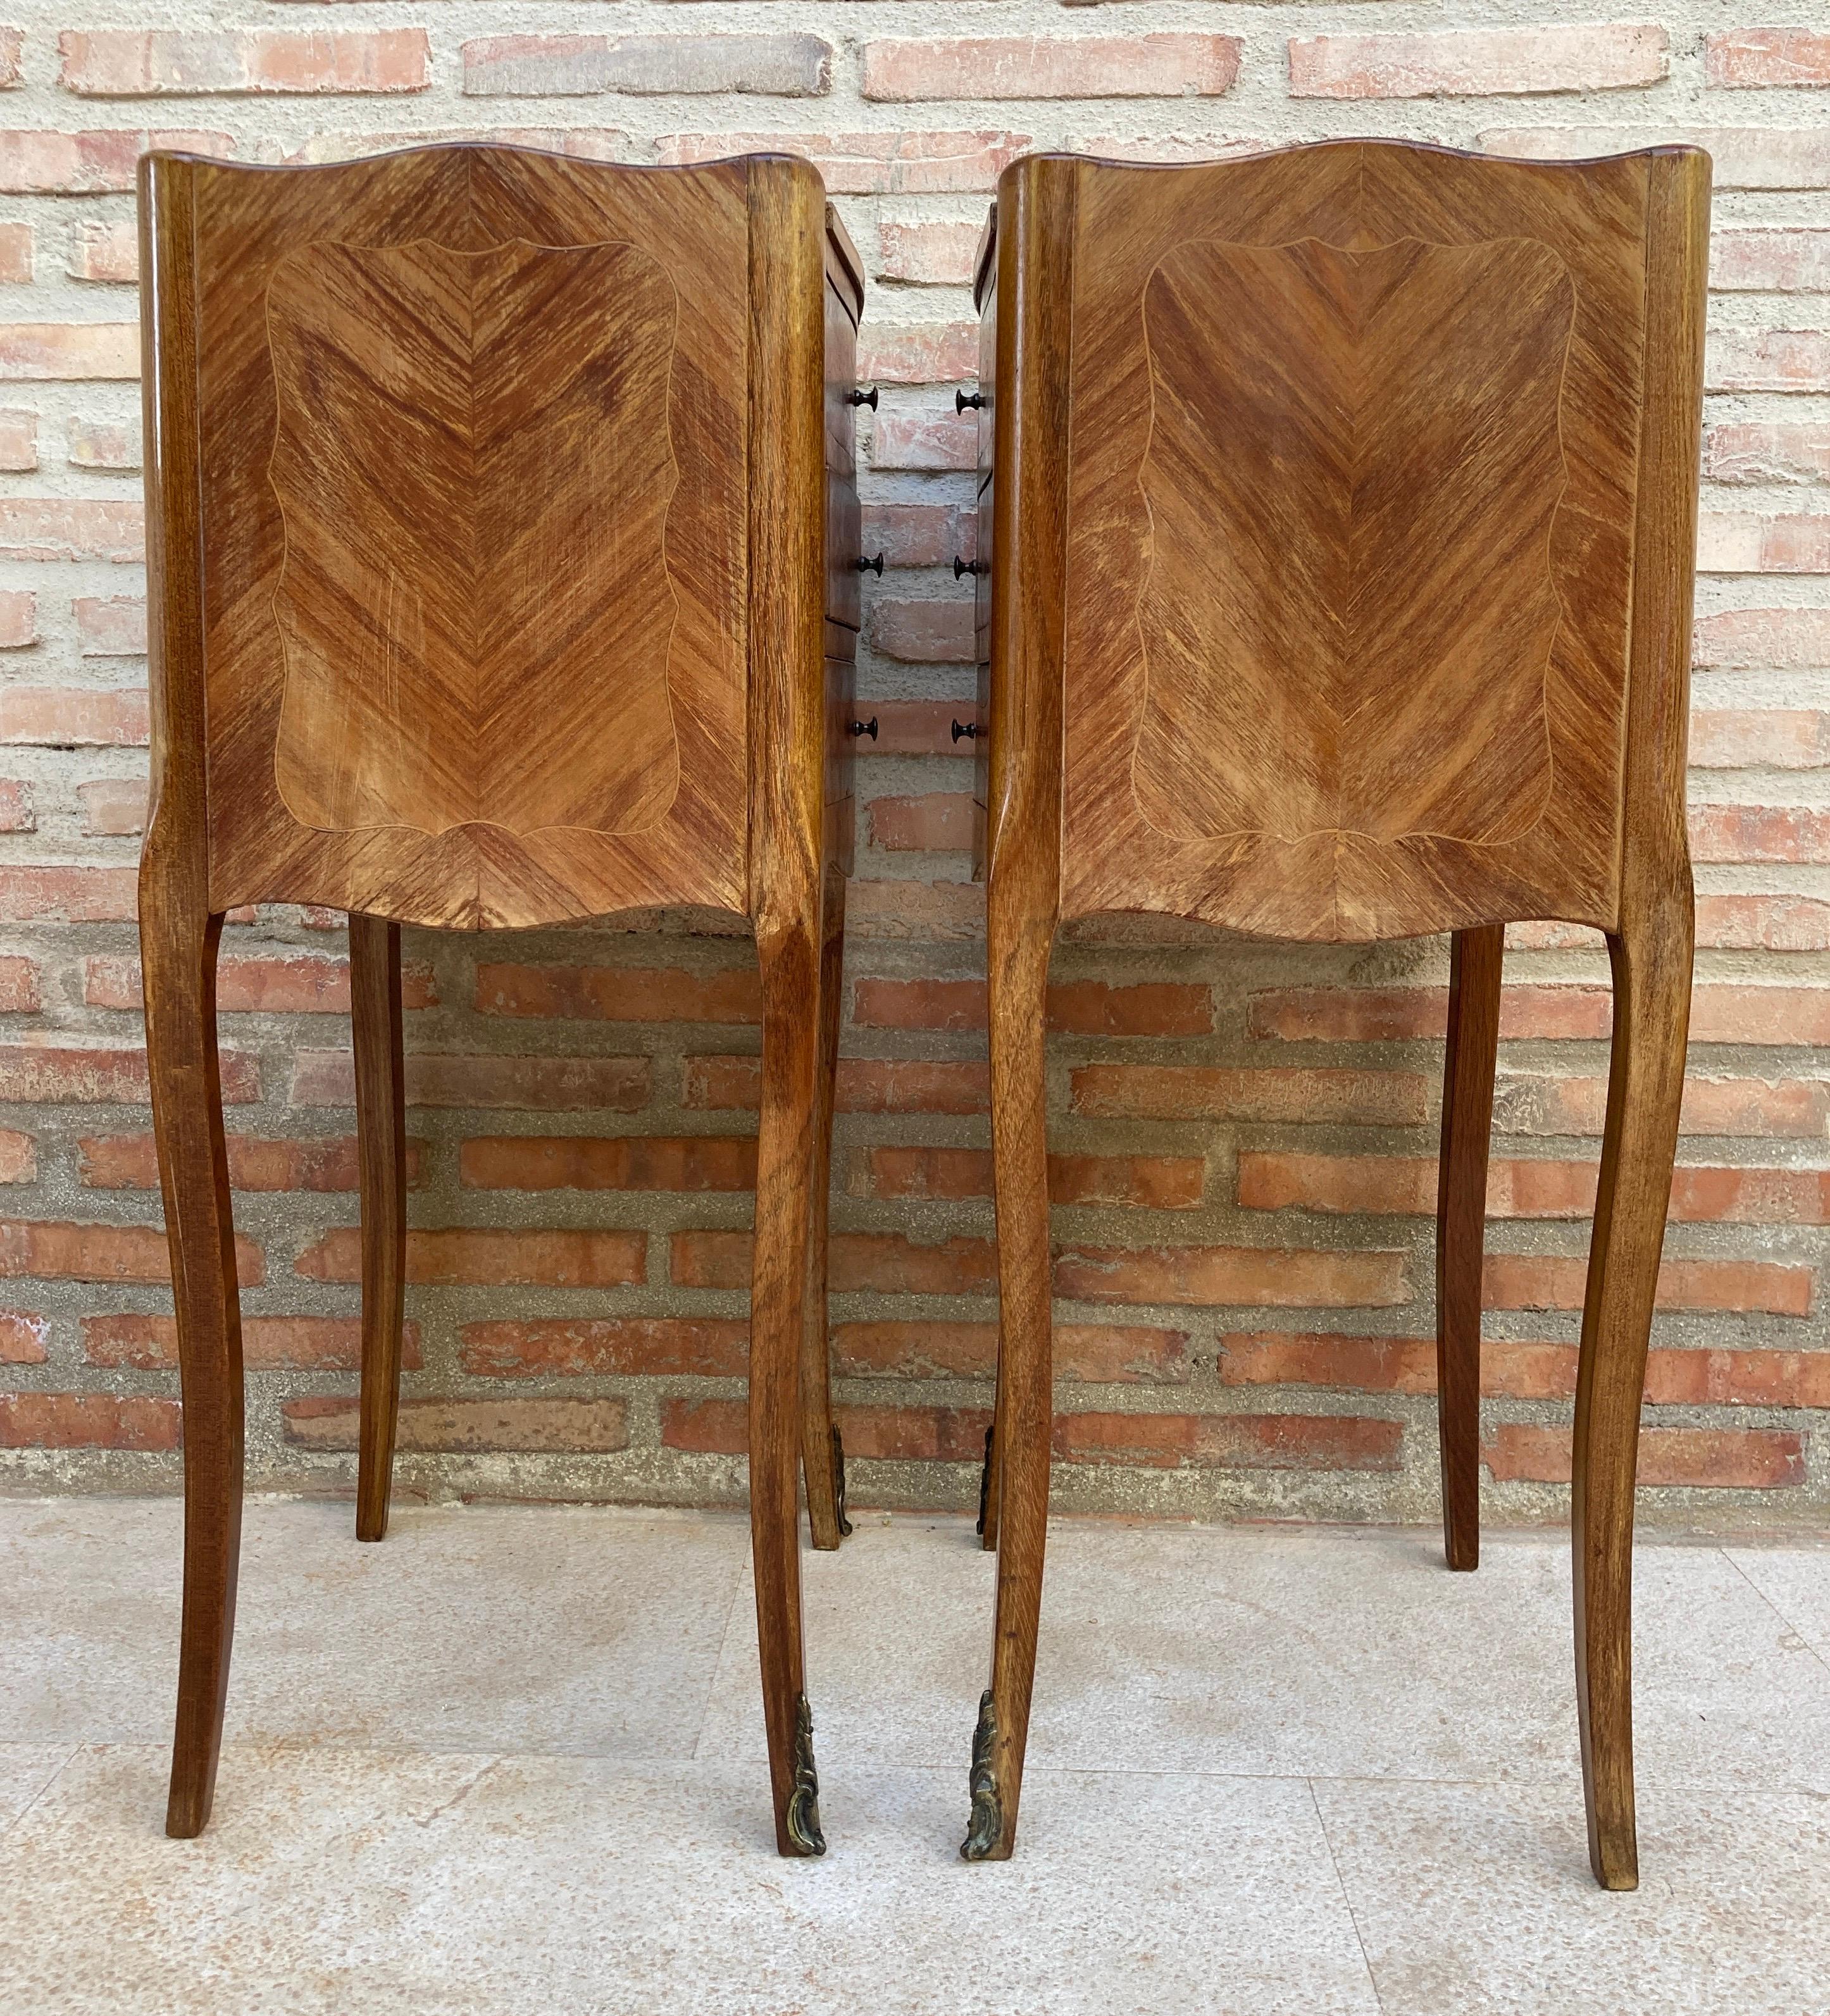 French Provincial French Nightstands in Walnut with Three Drawers, 1940s, Set of 2 For Sale